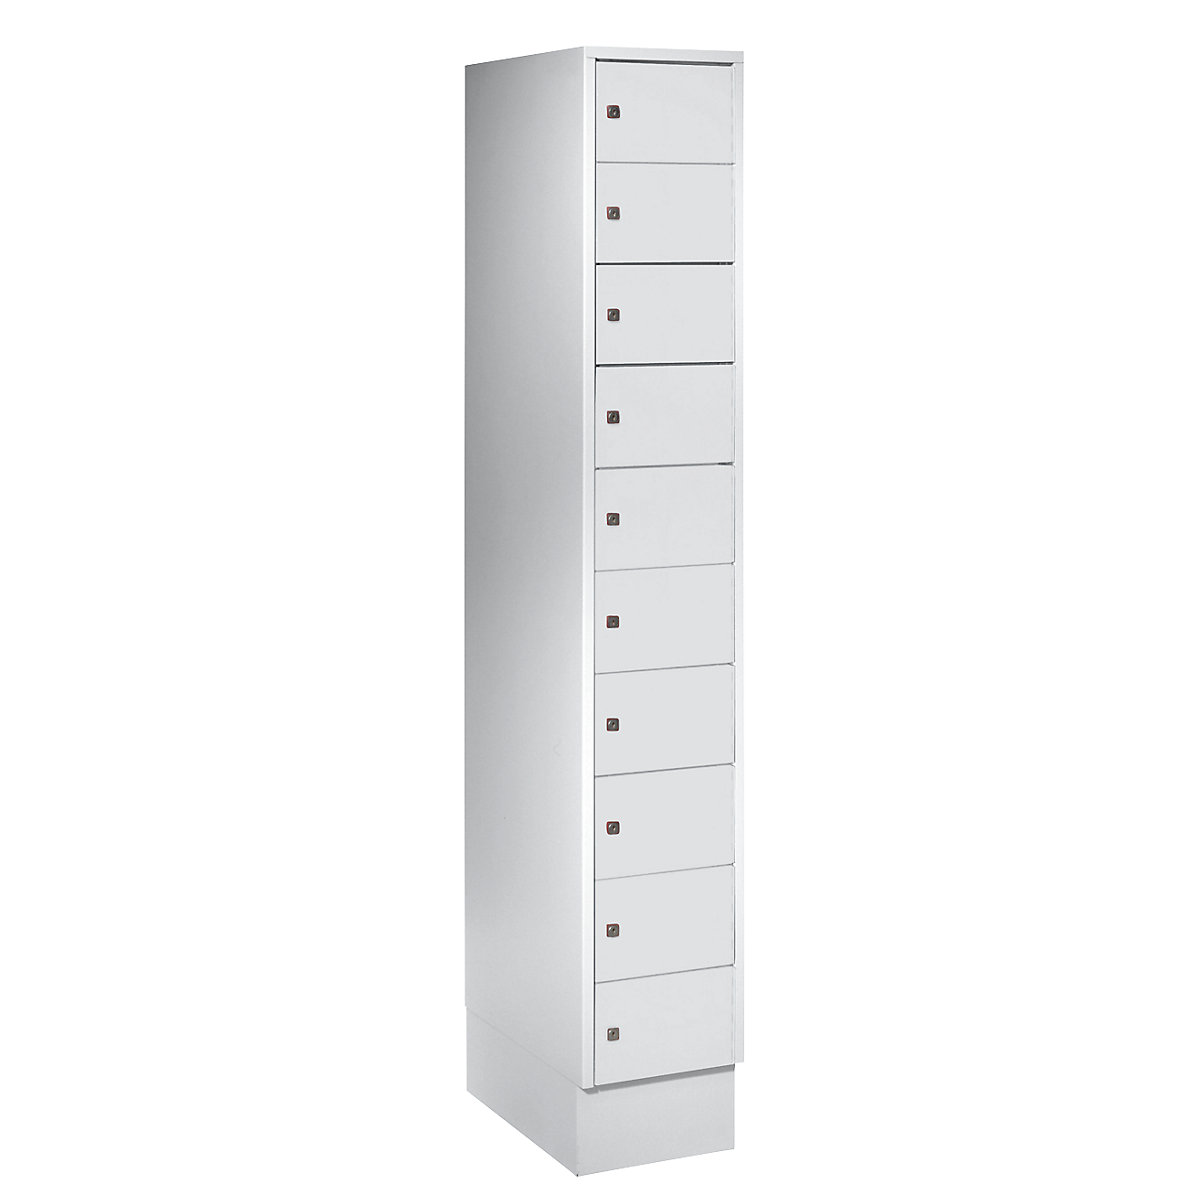 Small locker cupboard – Wolf, 10 compartments, HxW 1850 x 300 mm, door colour light grey RAL 7035